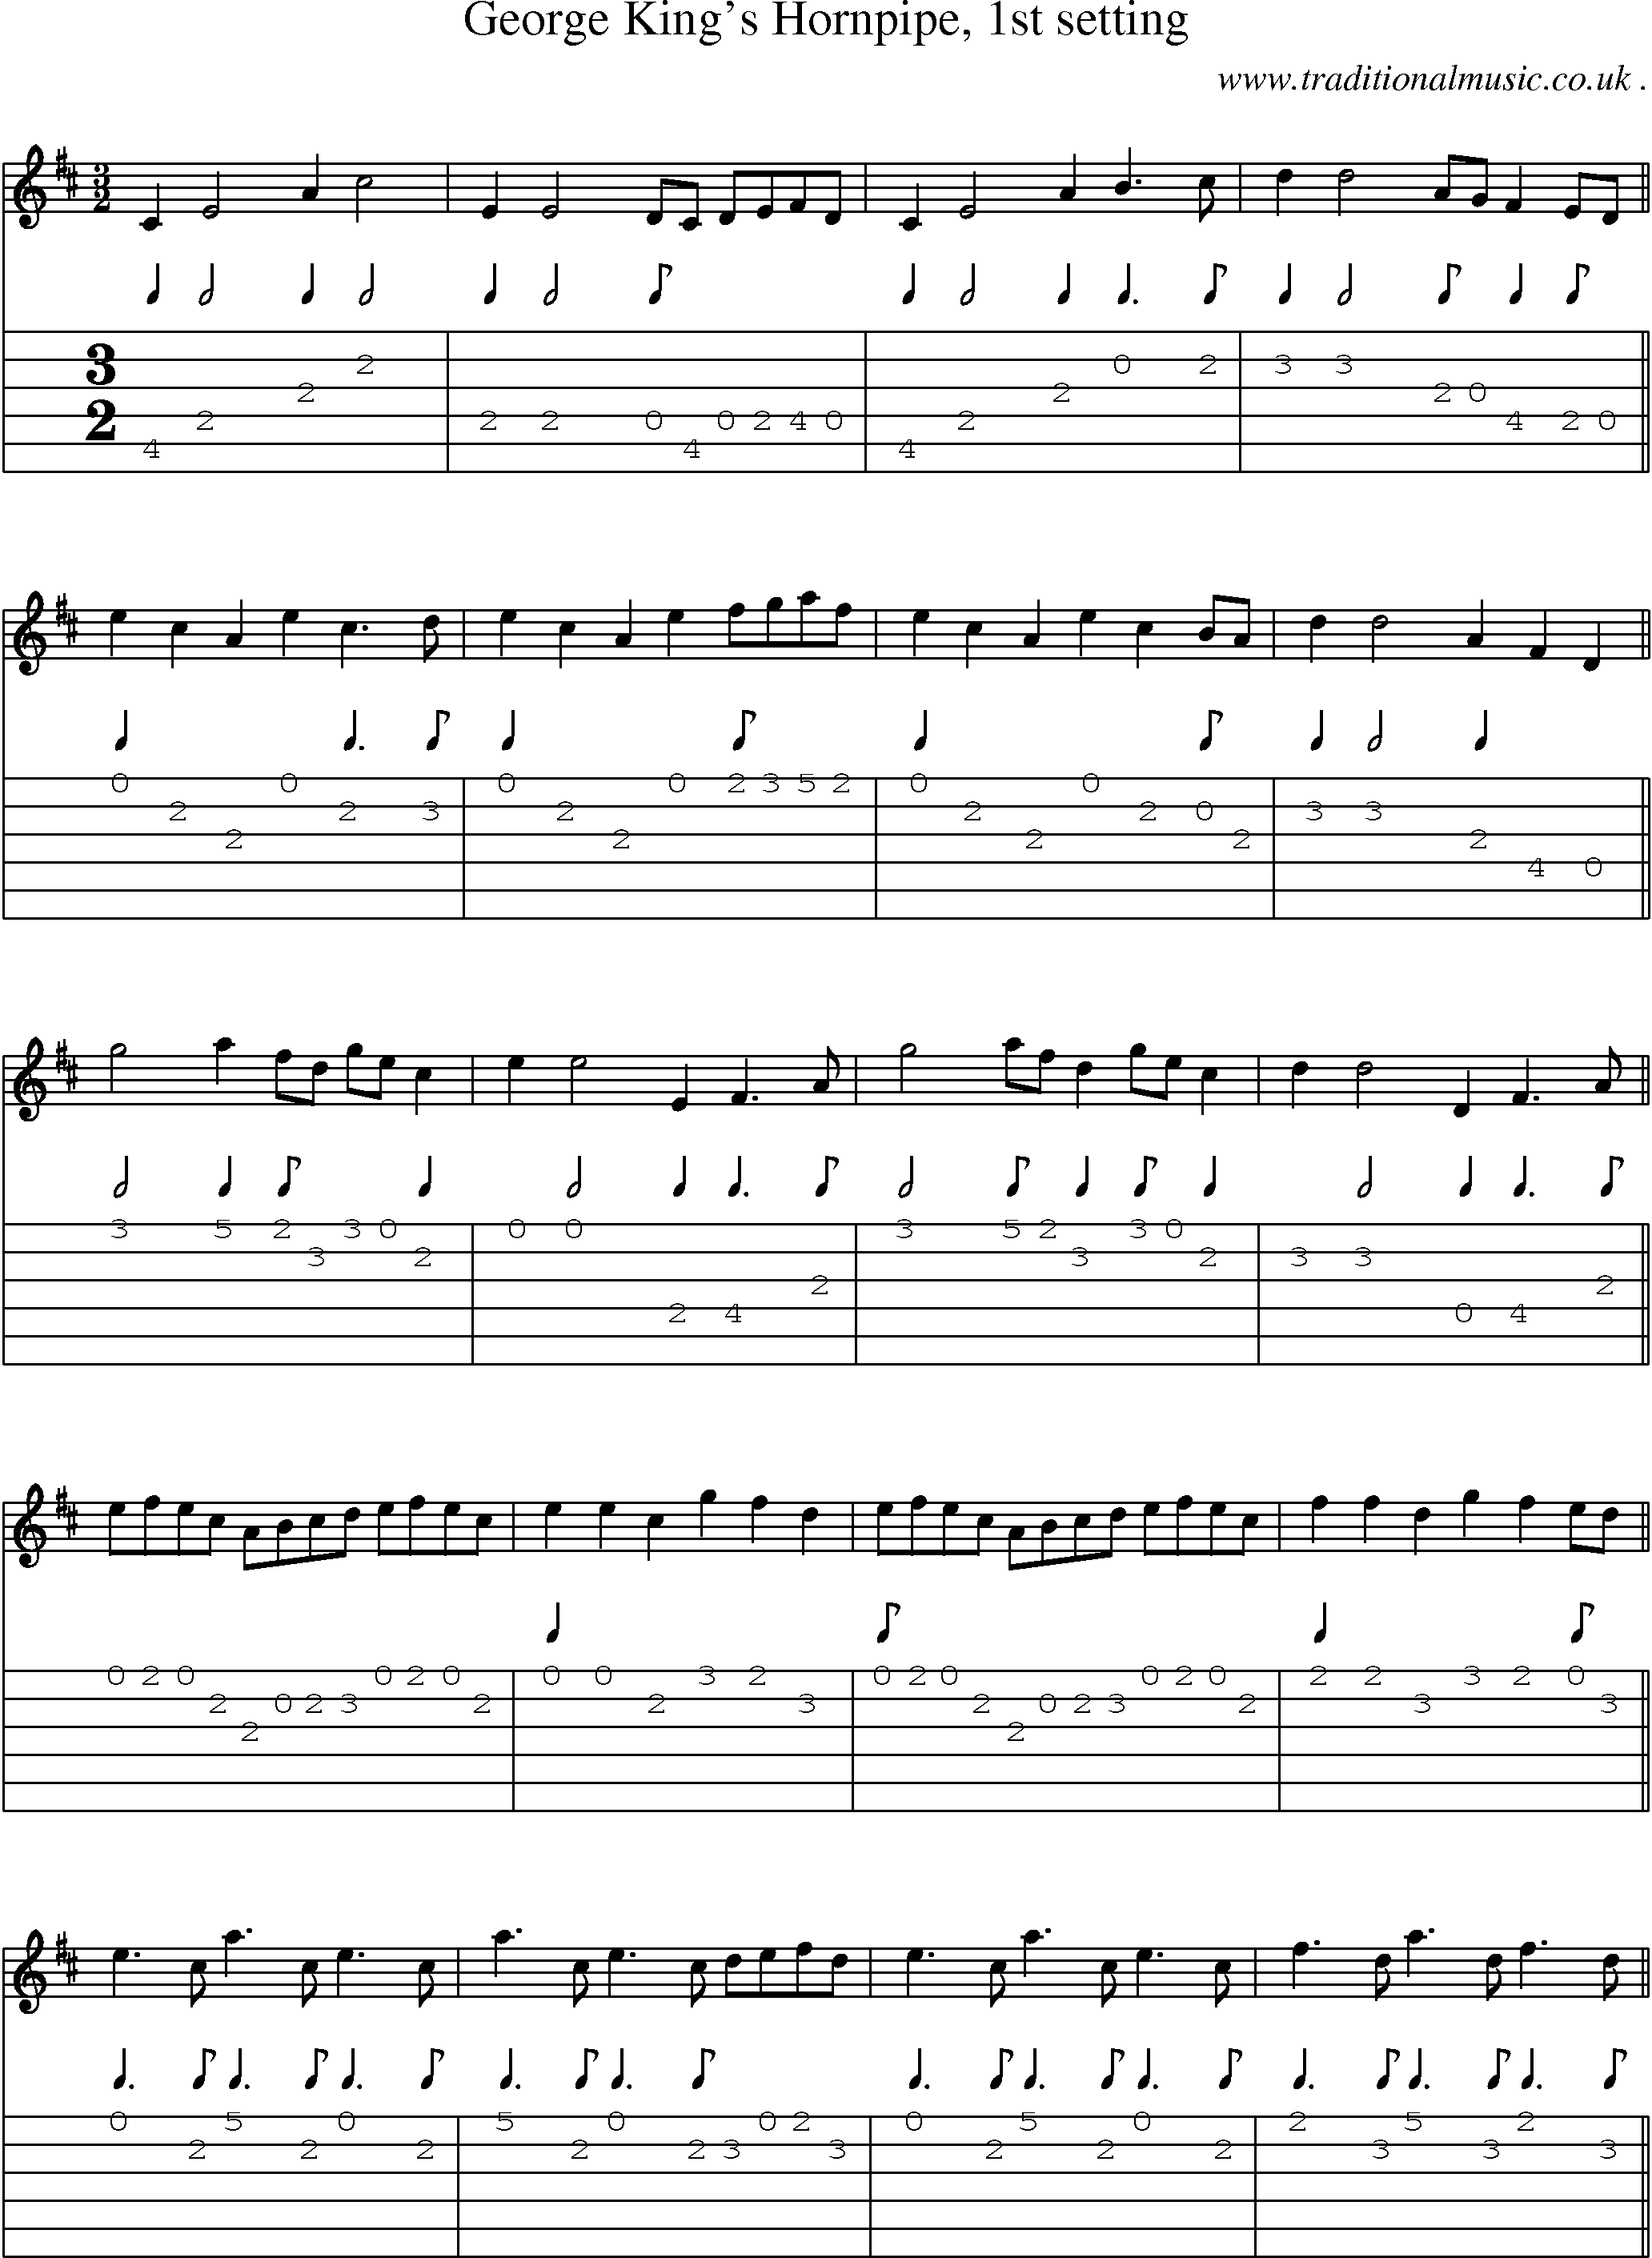 Sheet-Music and Guitar Tabs for George Kings Hornpipe 1st Setting